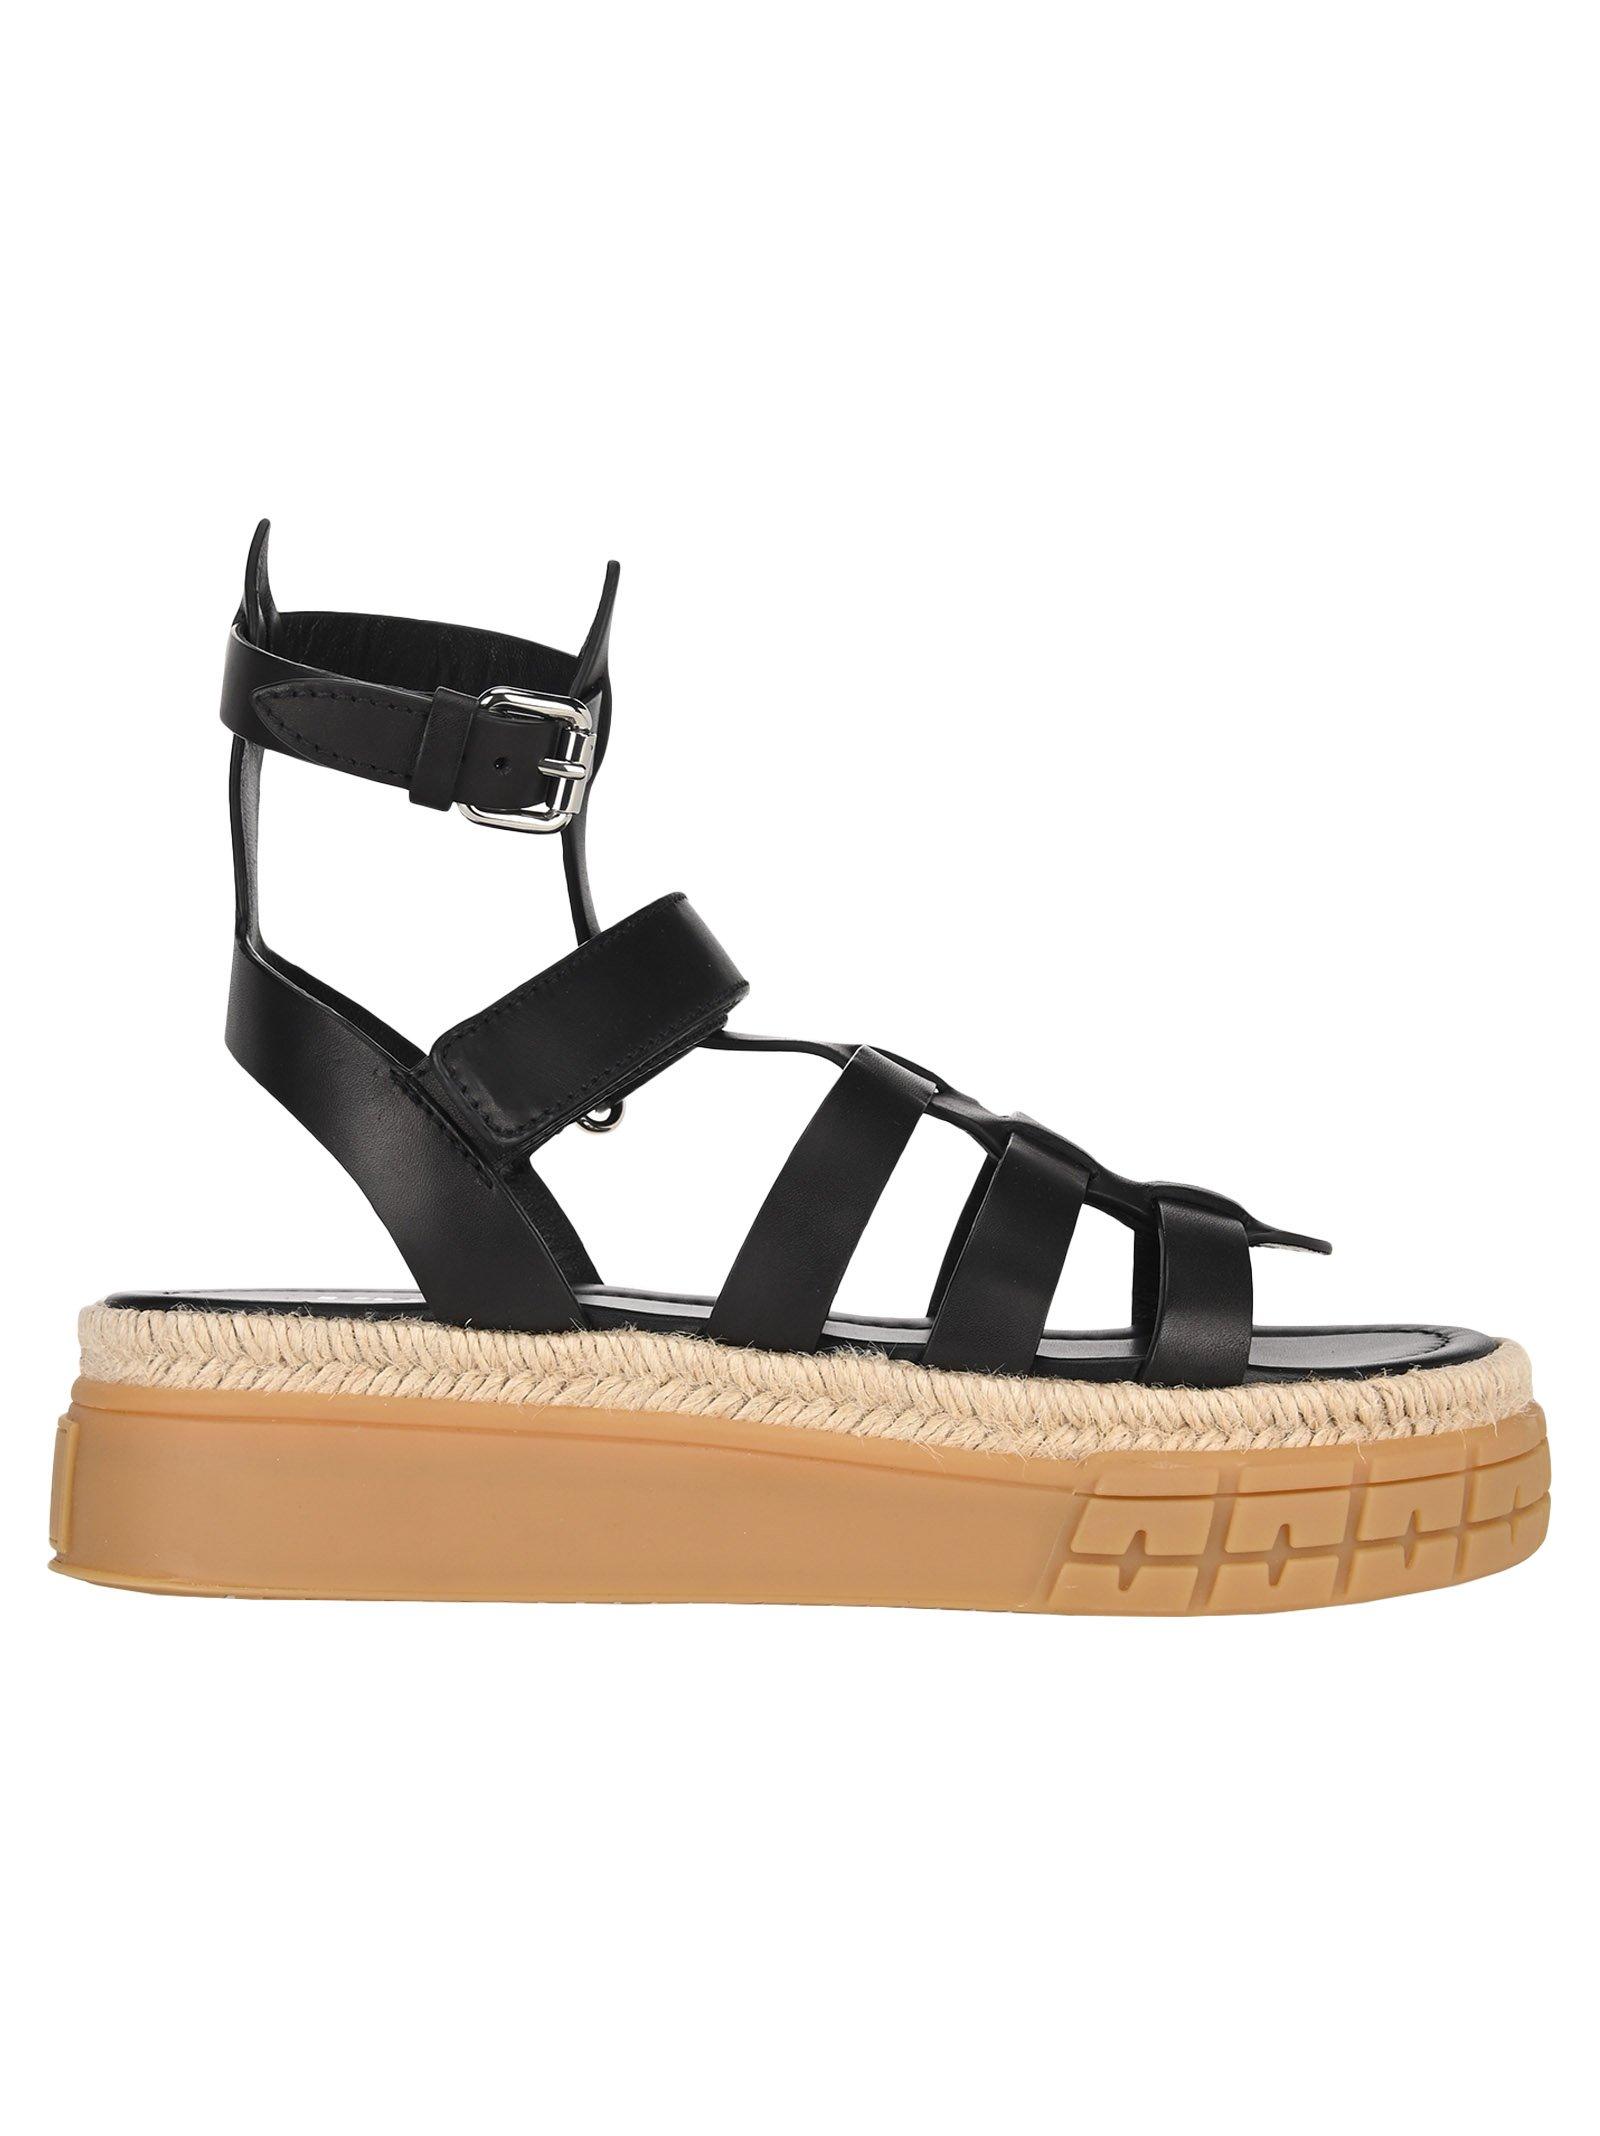 Prada Leather Thick Sole Gladiator Sandals in Black - Lyst